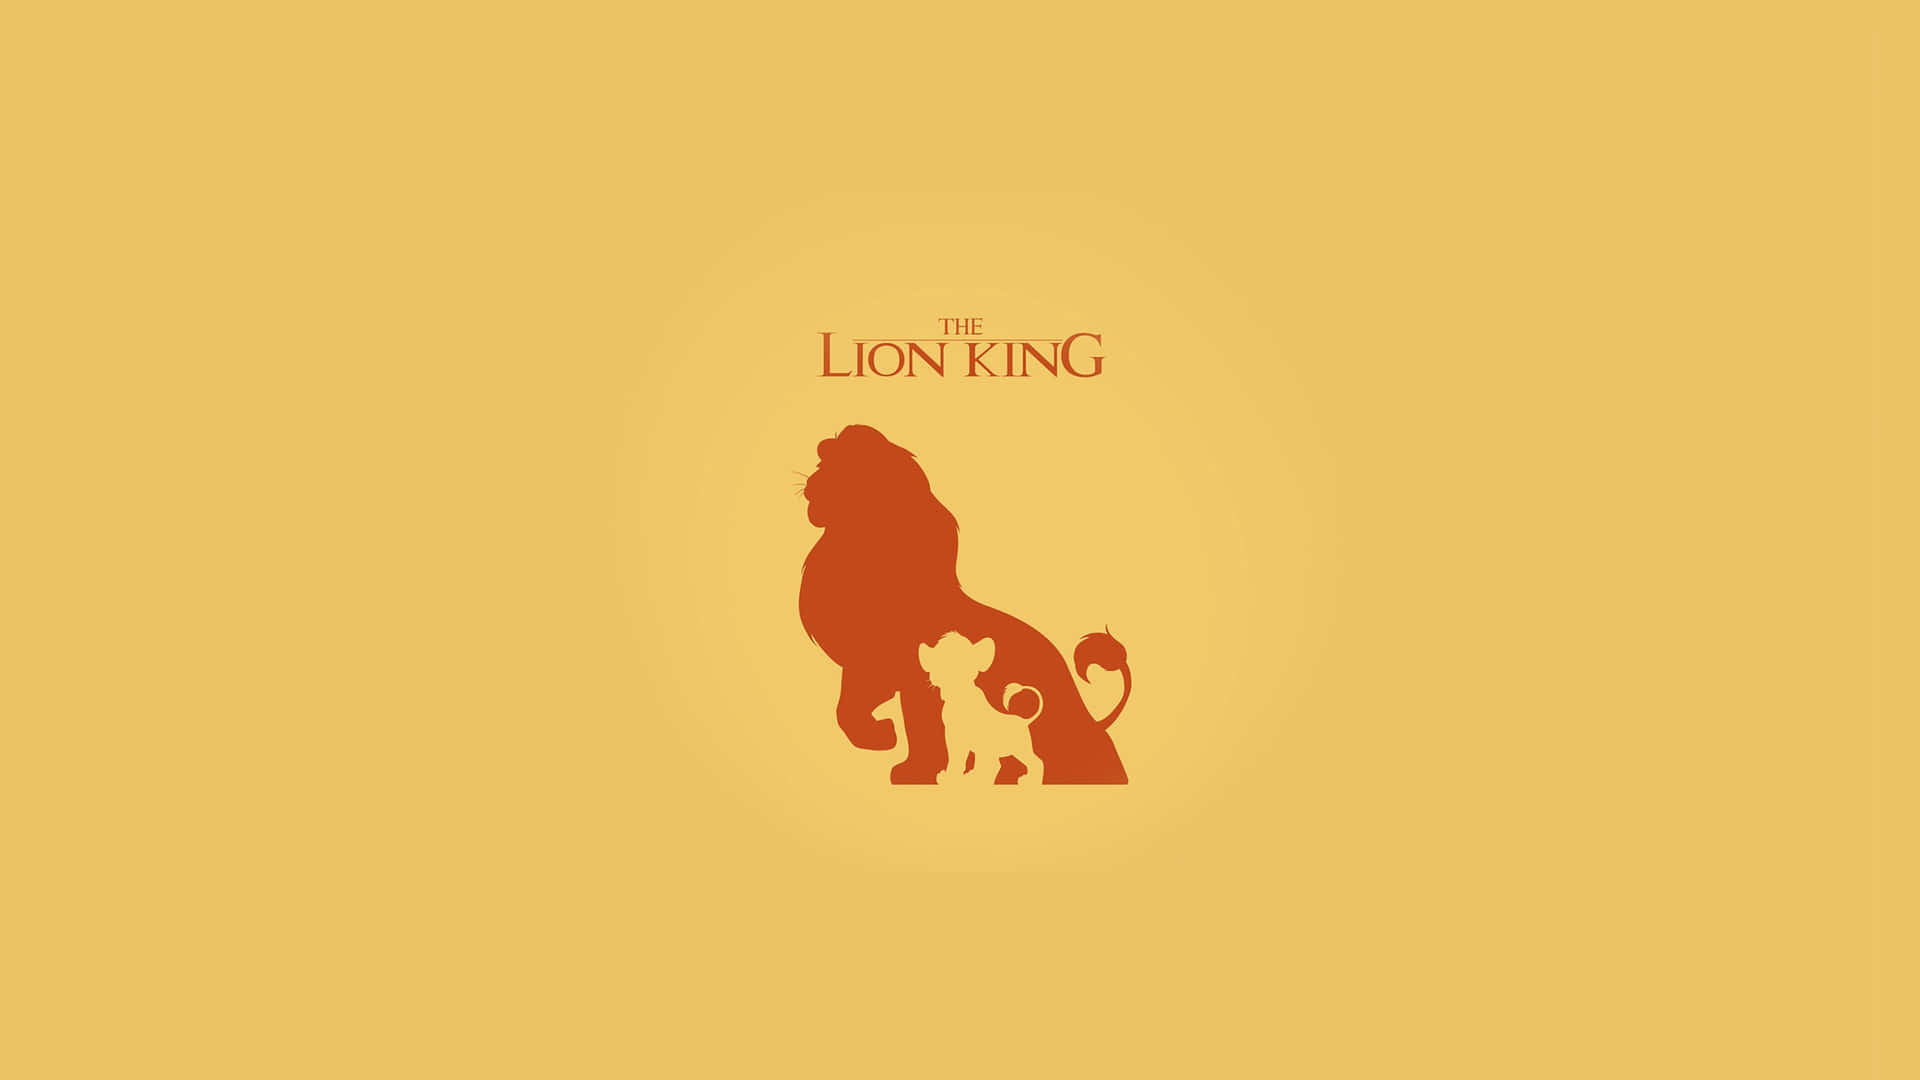 The Lion King Silhouette Art Background